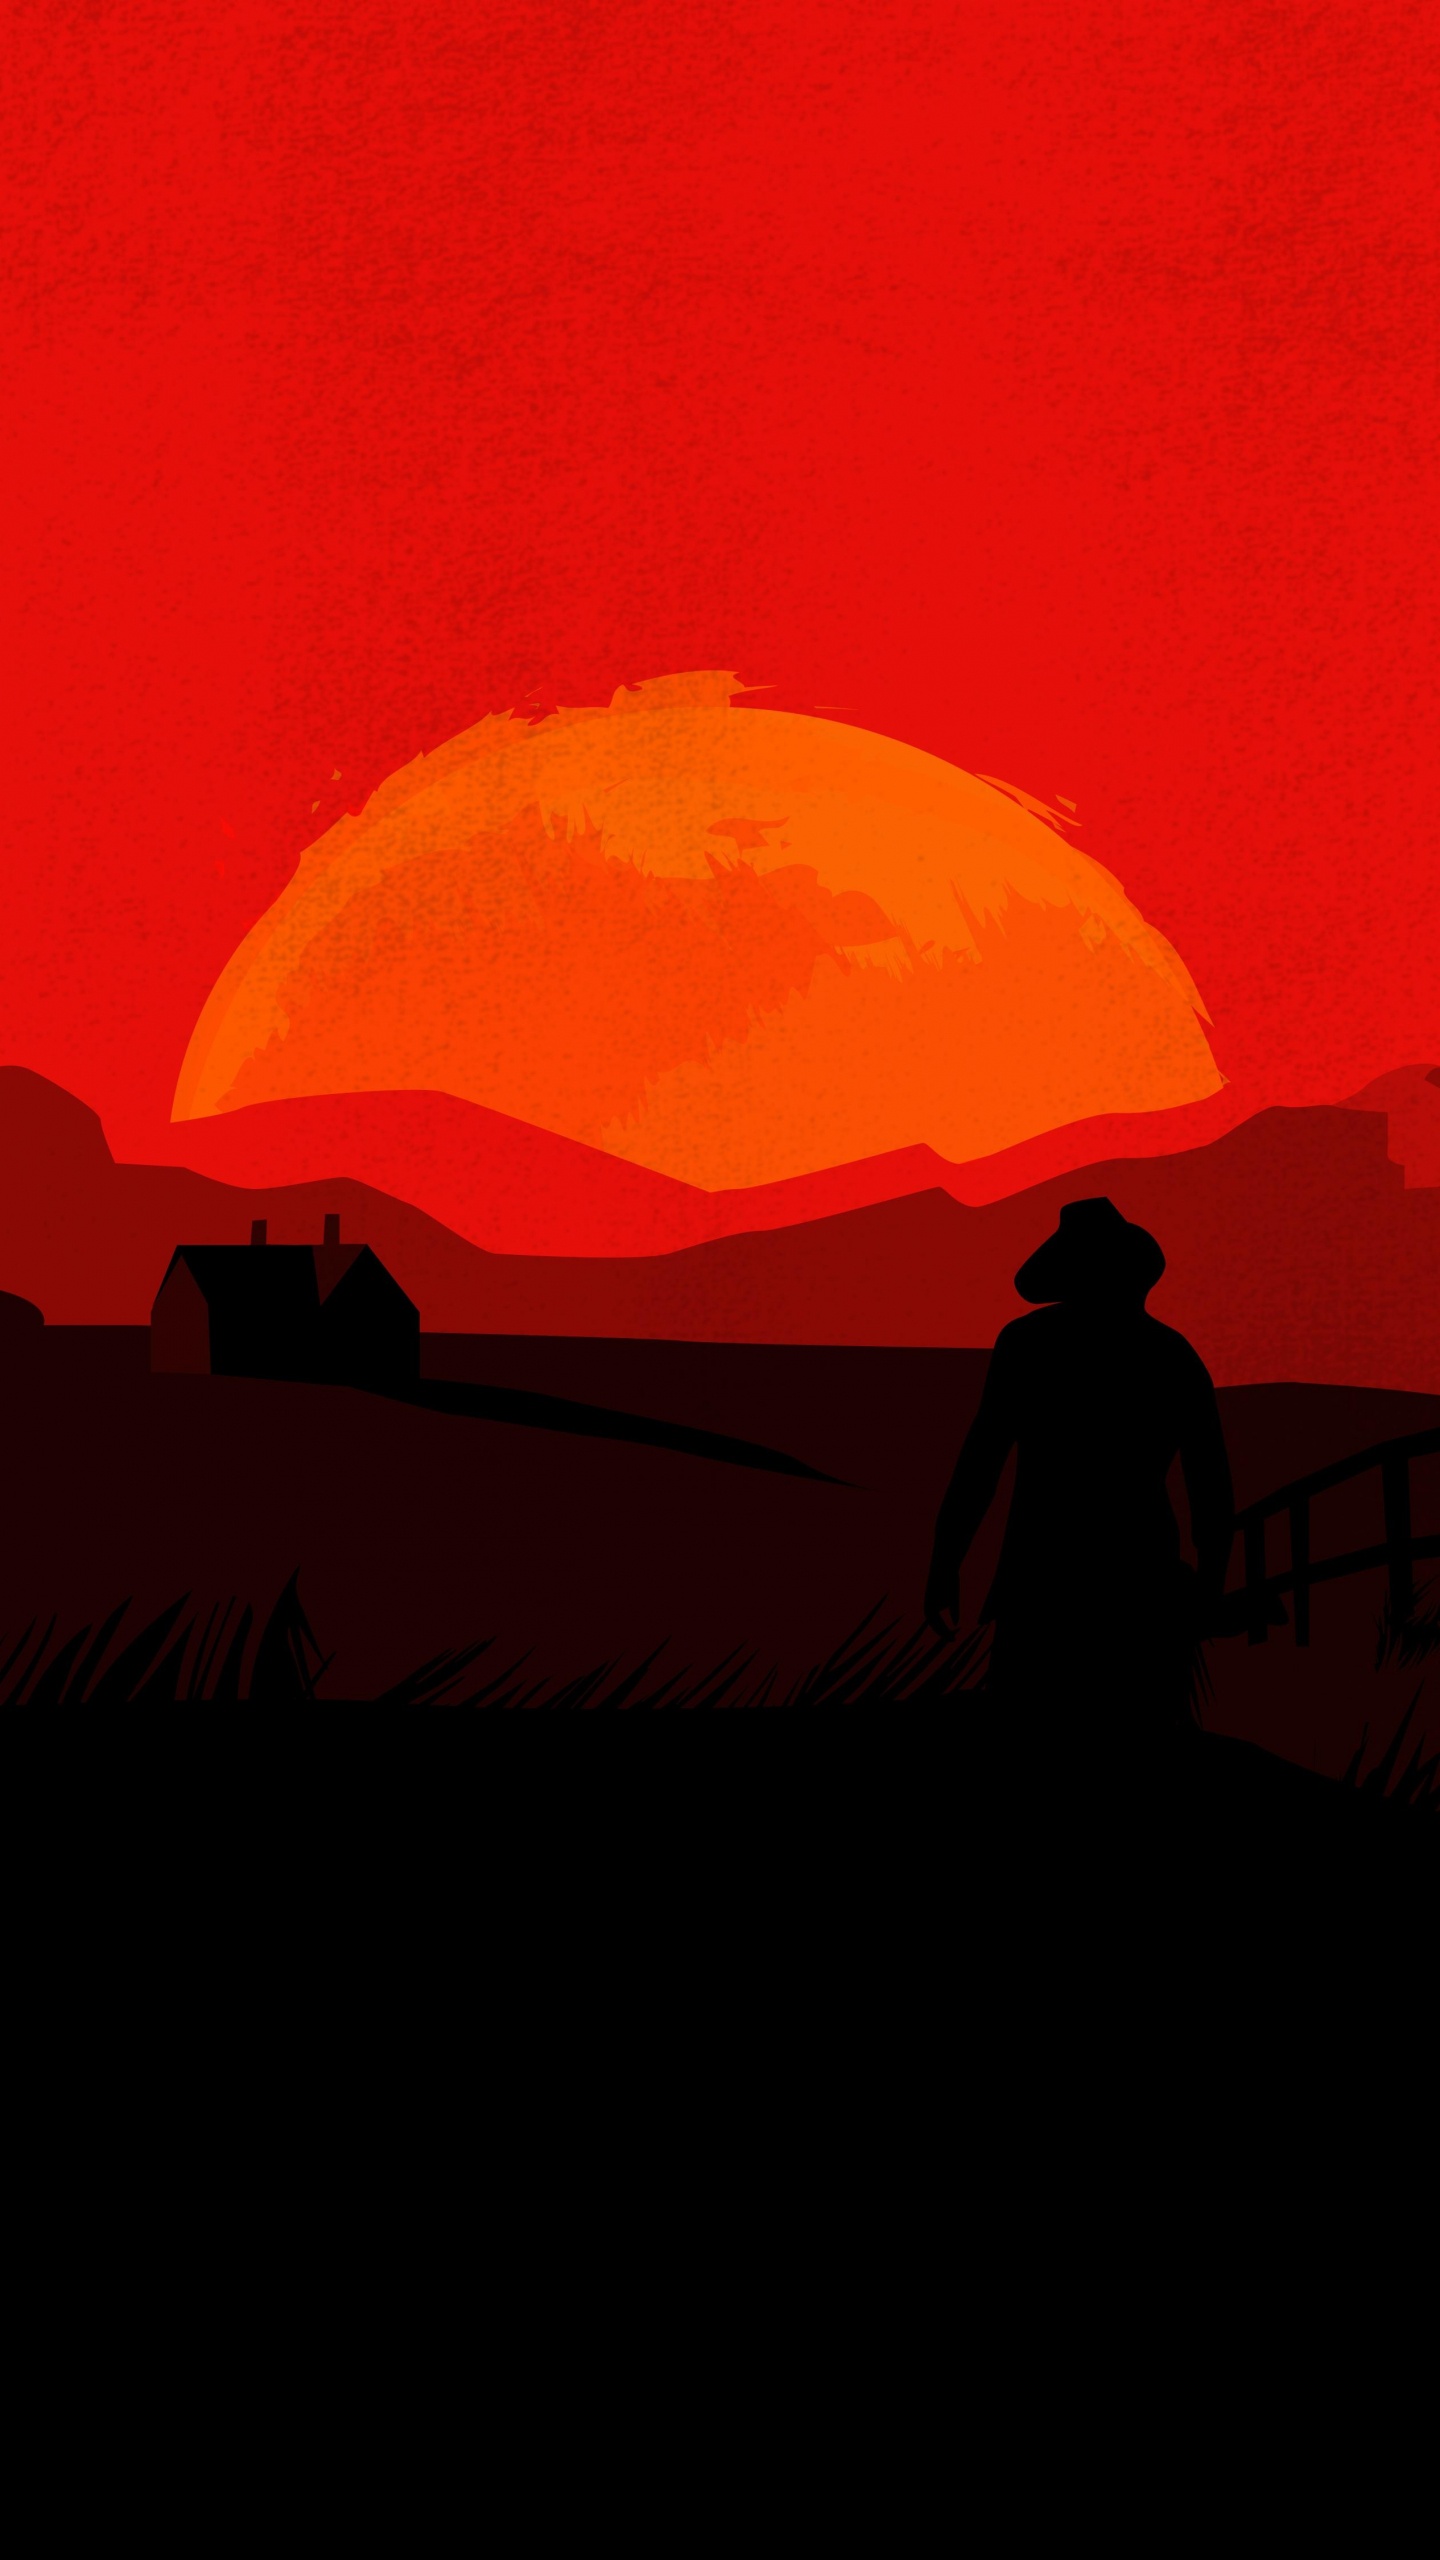 Red Dead Redemption 2, Red Dead Redemption, Red, Afterglow, Lever. Wallpaper in 1440x2560 Resolution